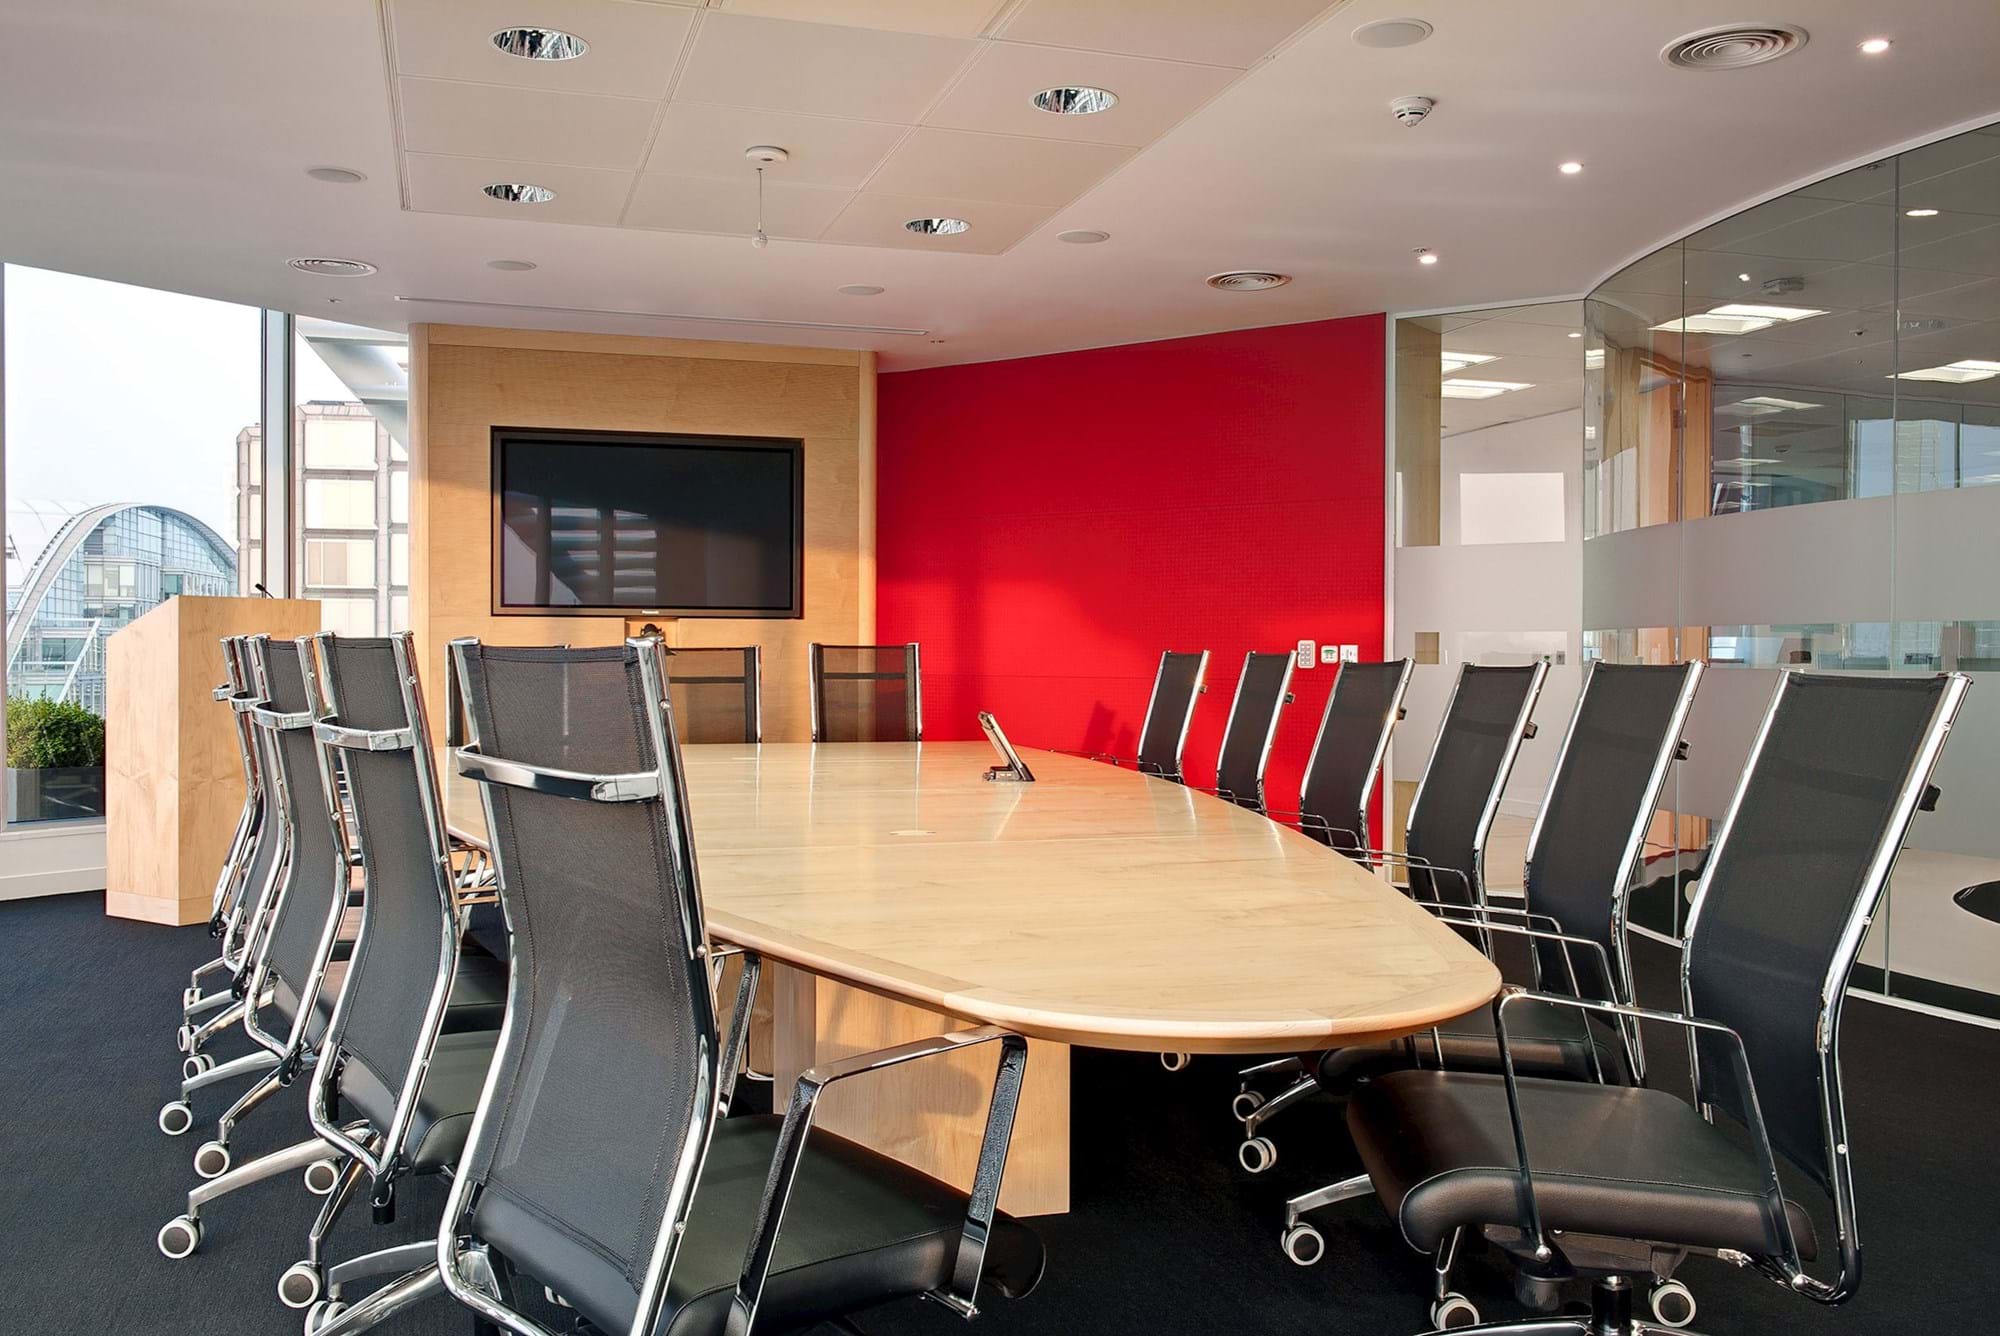 Modus Workspace office design, fit out and refurbishment - G4S - Meeting Room - GS4_06_highres_sRGB.jpg